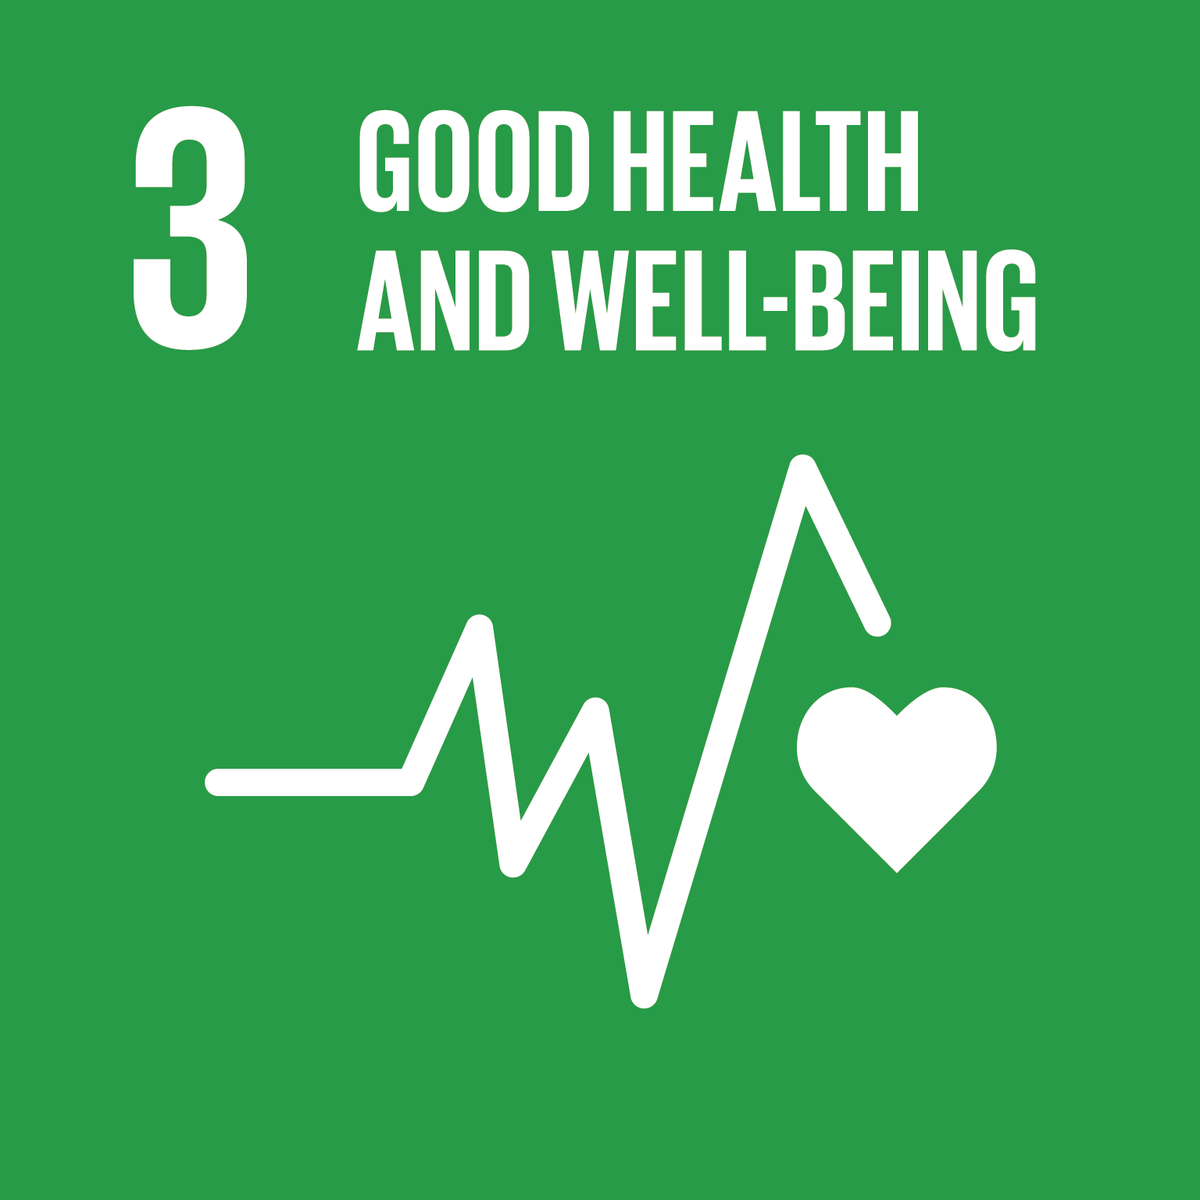 sustainable development goal 3 - good health and well-being